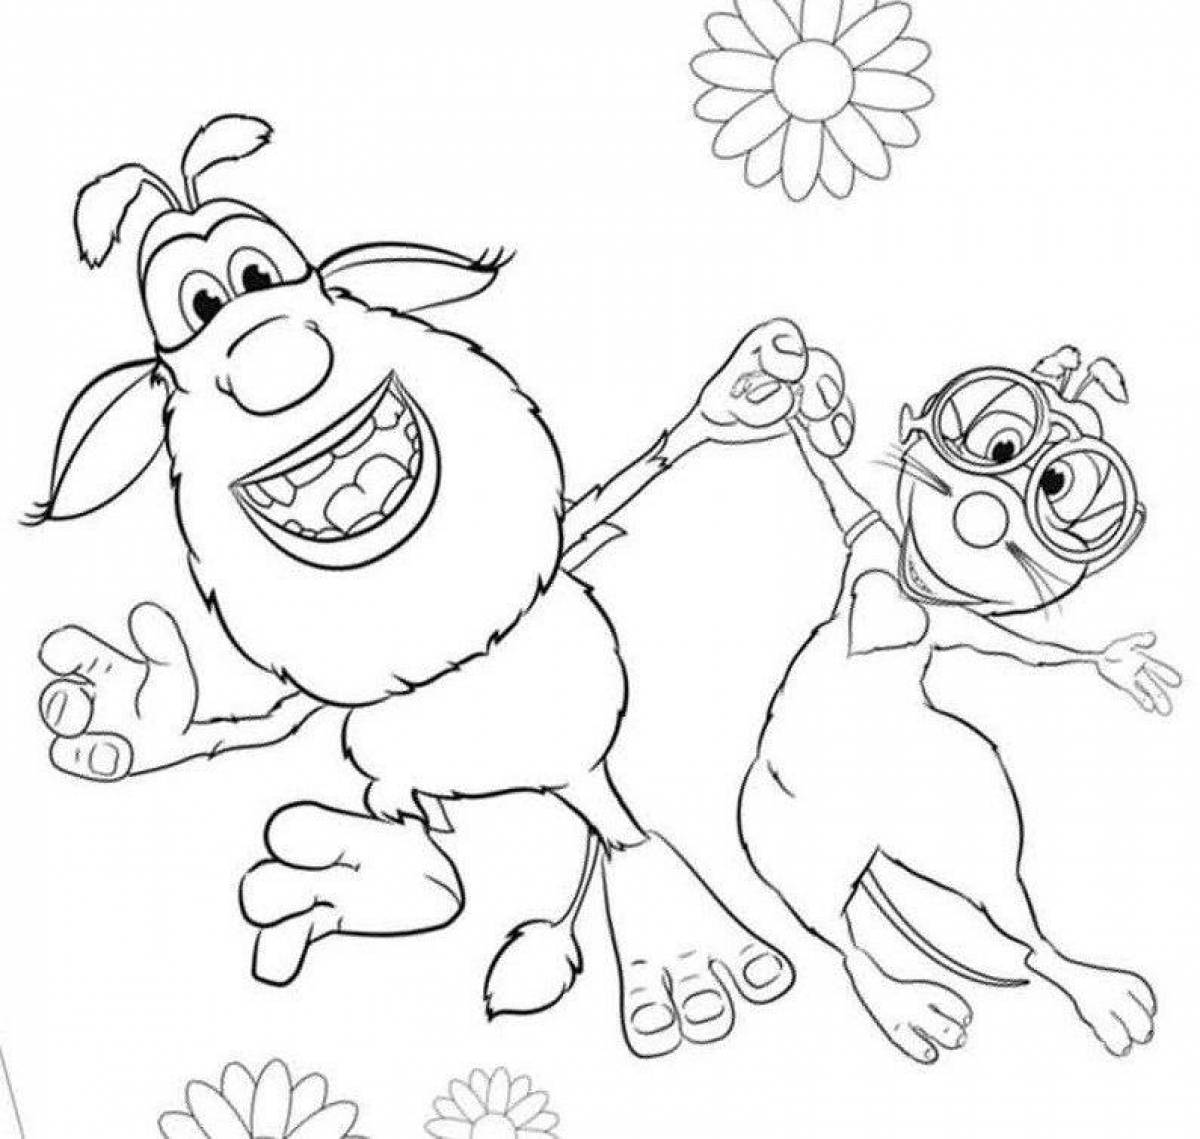 Gorgeous booba coloring book for preschoolers